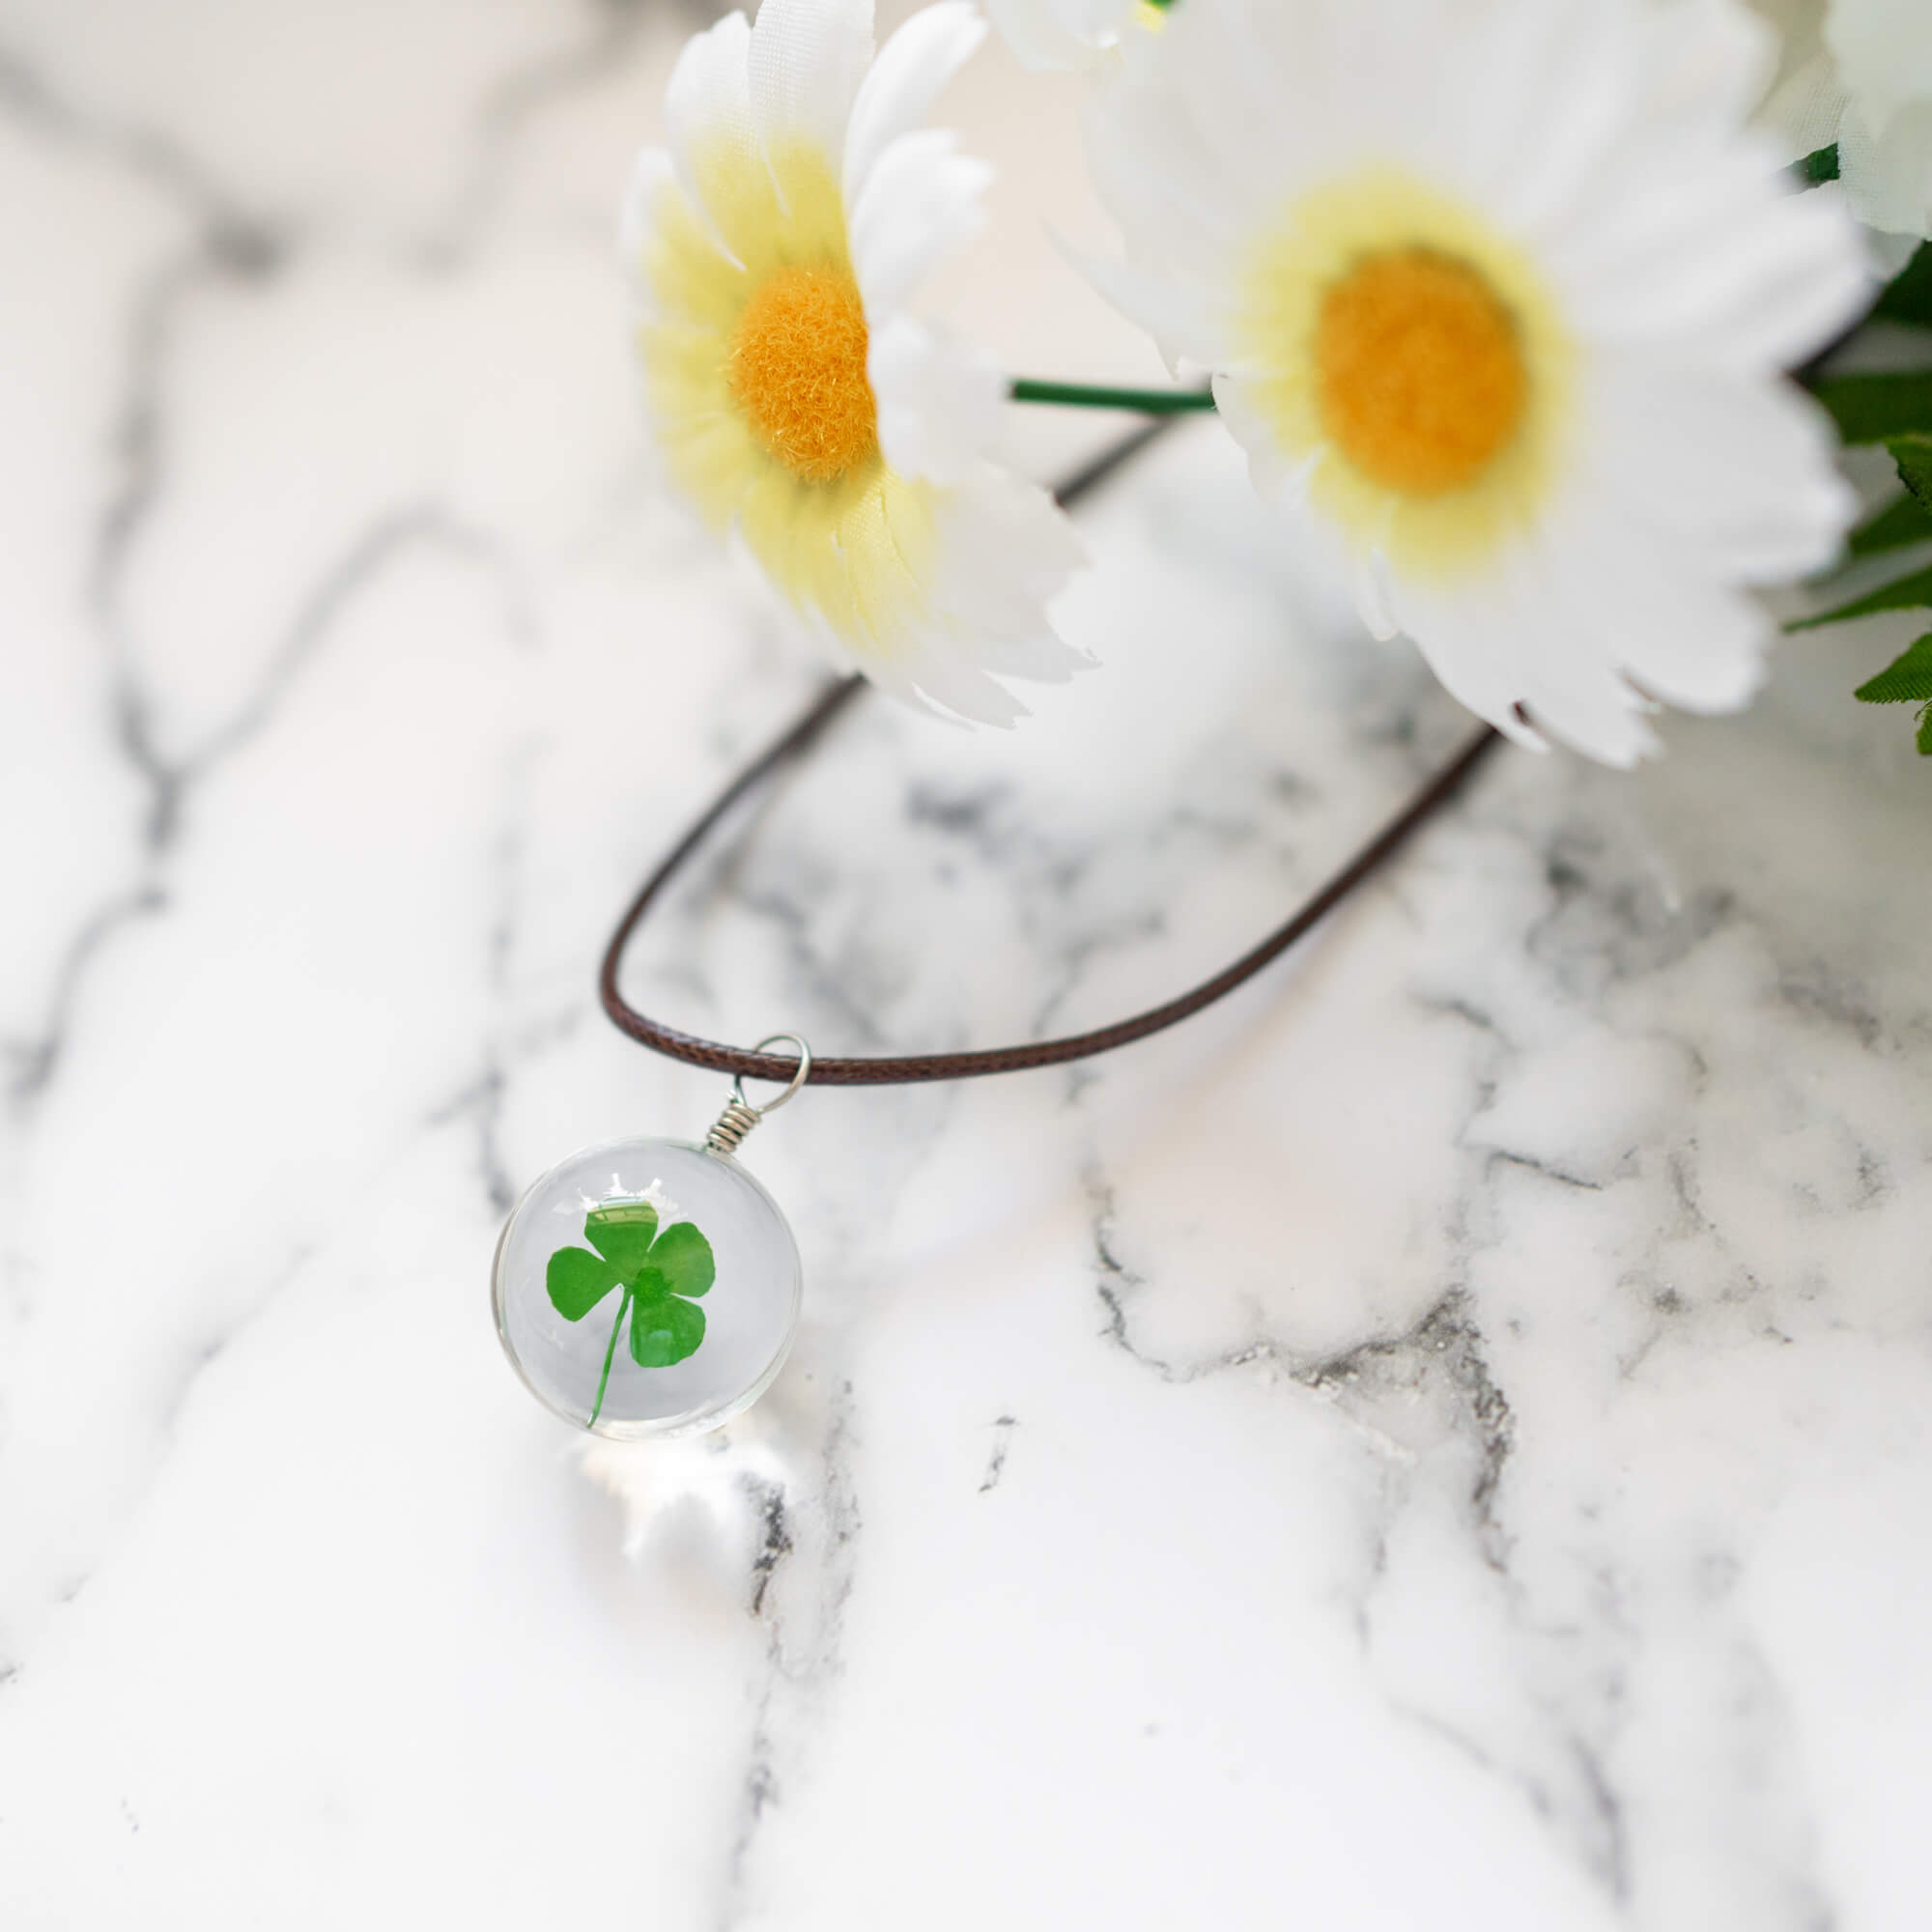 Four-leaf Clover Breastmilk Necklace – Jewelry Memories